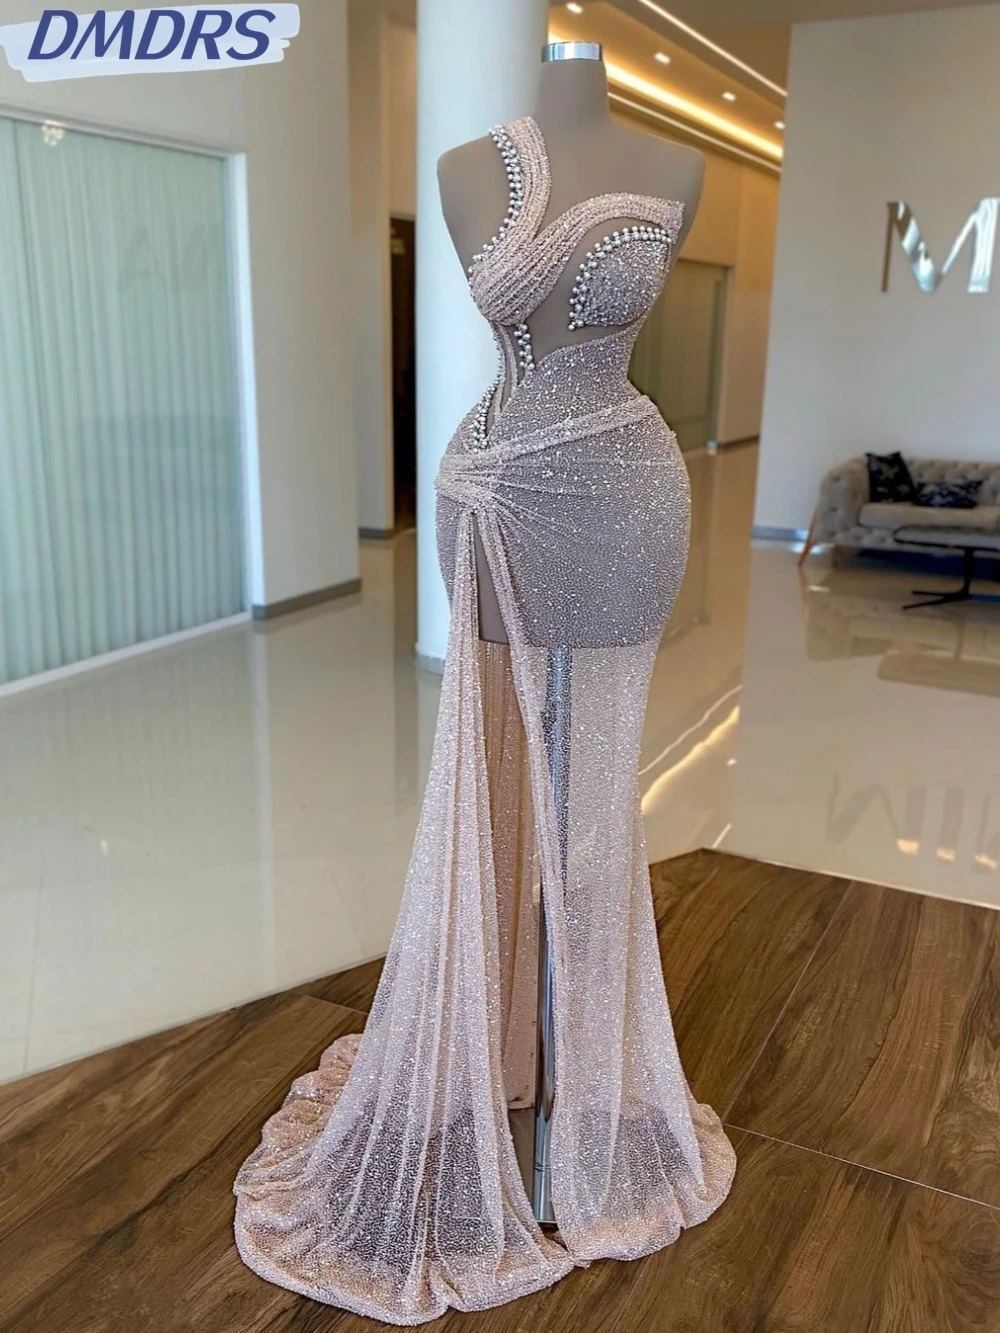 Light Pink Straight Long Prom Gown Glitter Sequins Pearls Cocktail Dresses Sexy Illusion High Slit Evening Dress Robe De Mariée